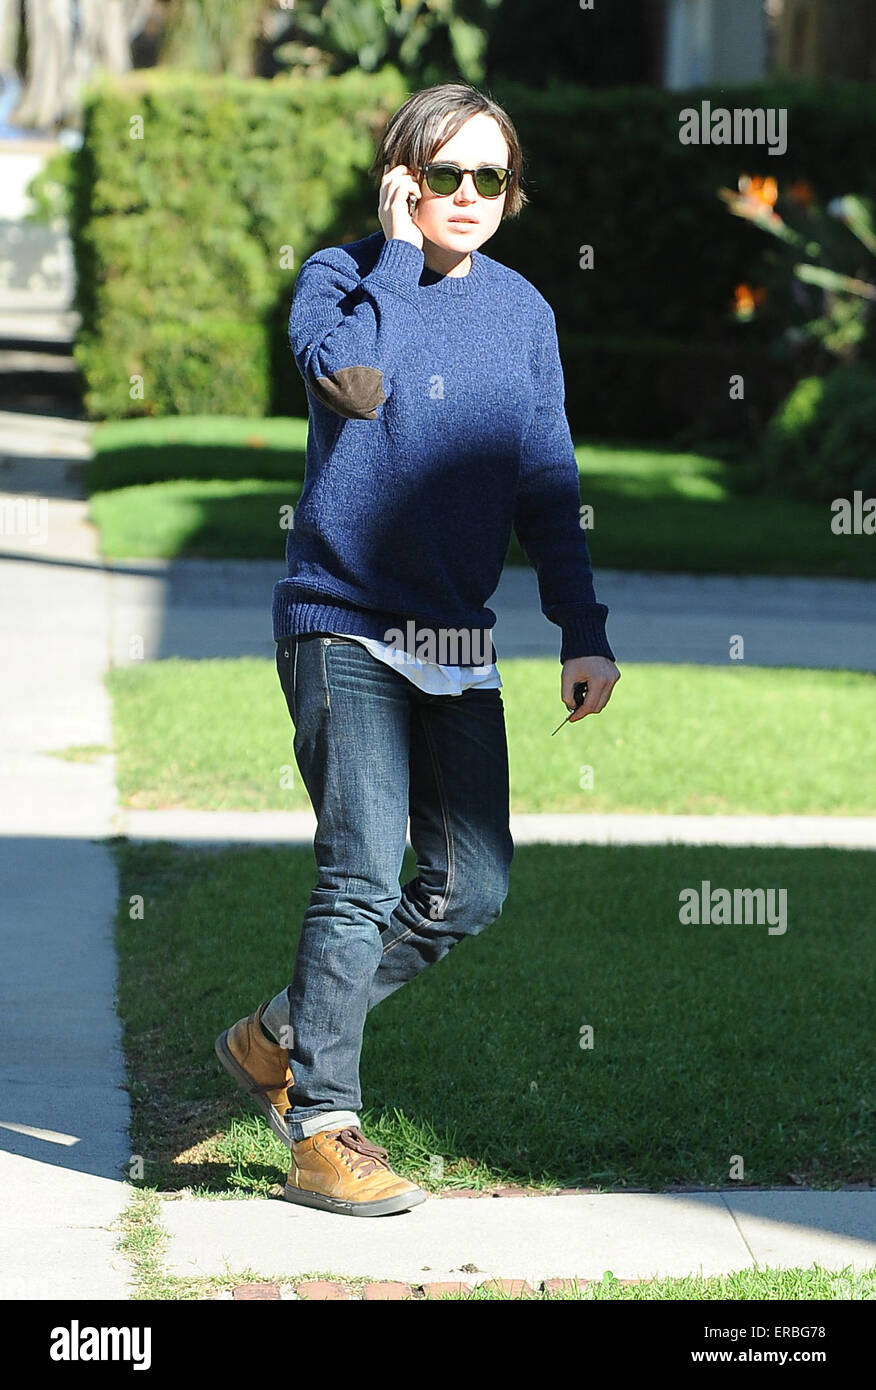 Ellen Page on the phone out and about in Los Angeles  Featuring: Ellen Page Where: Los Angeles, California, United States When: 26 Nov 2014 Credit: Sharppix/WENN.com Stock Photo